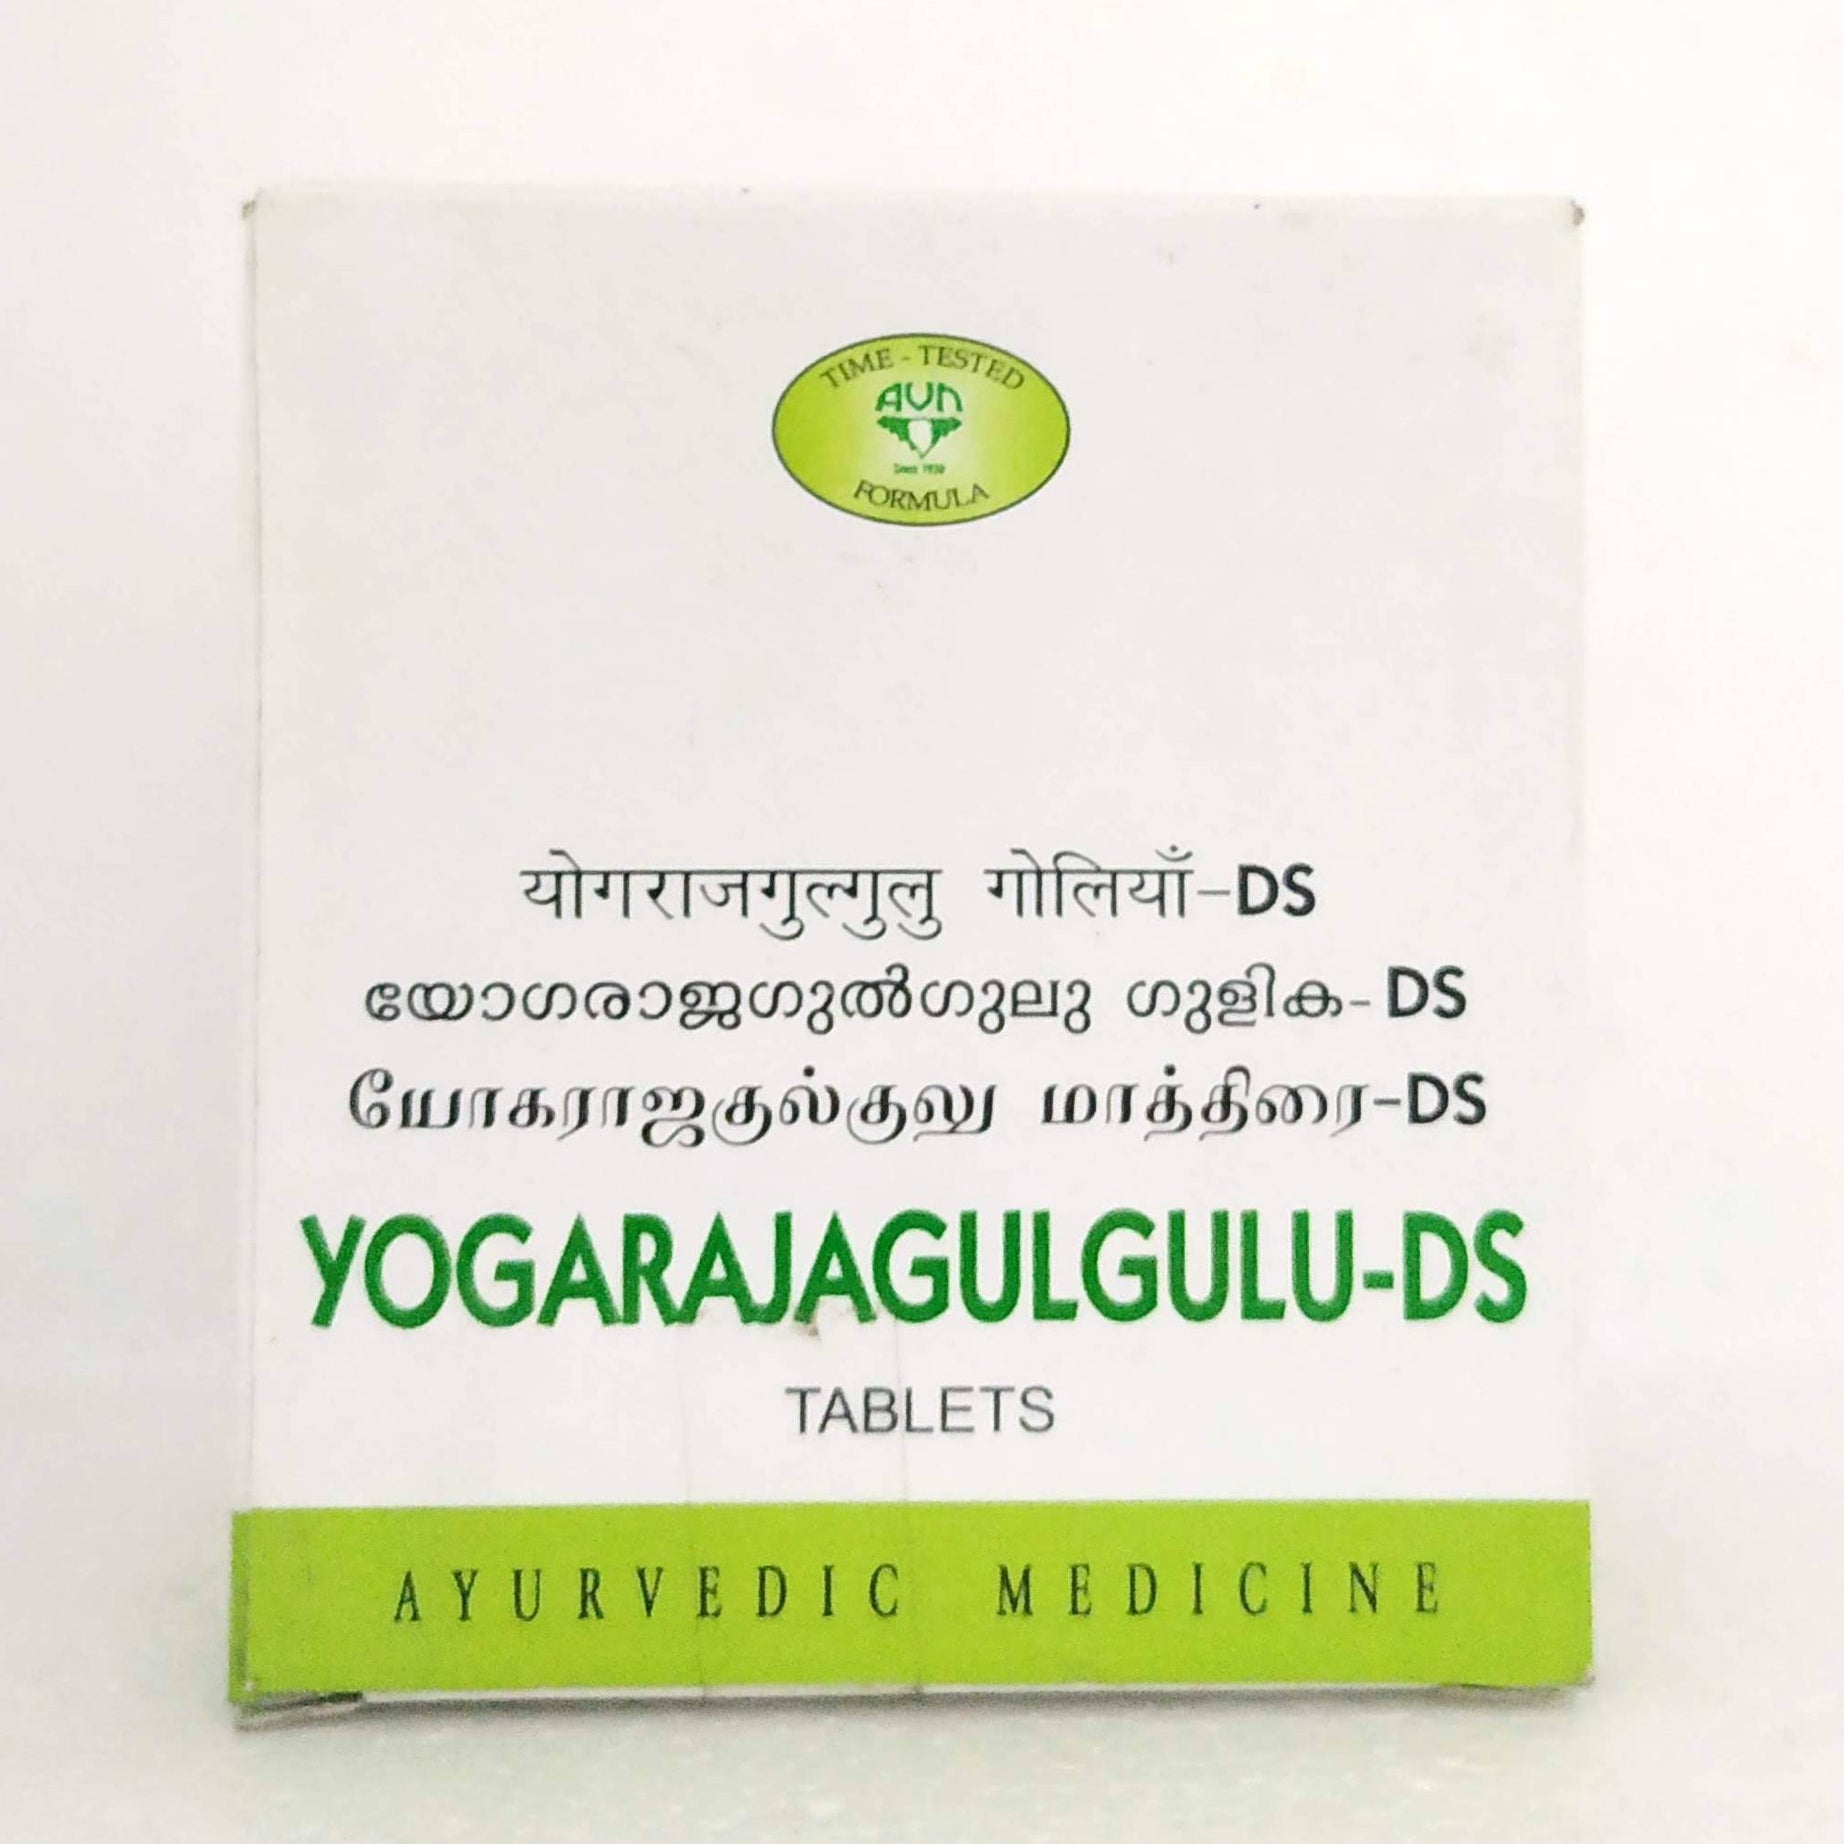 Shop Yogaraja Guggulu DS Tablets - 10Tablets at price 46.50 from AVN Online - Ayush Care